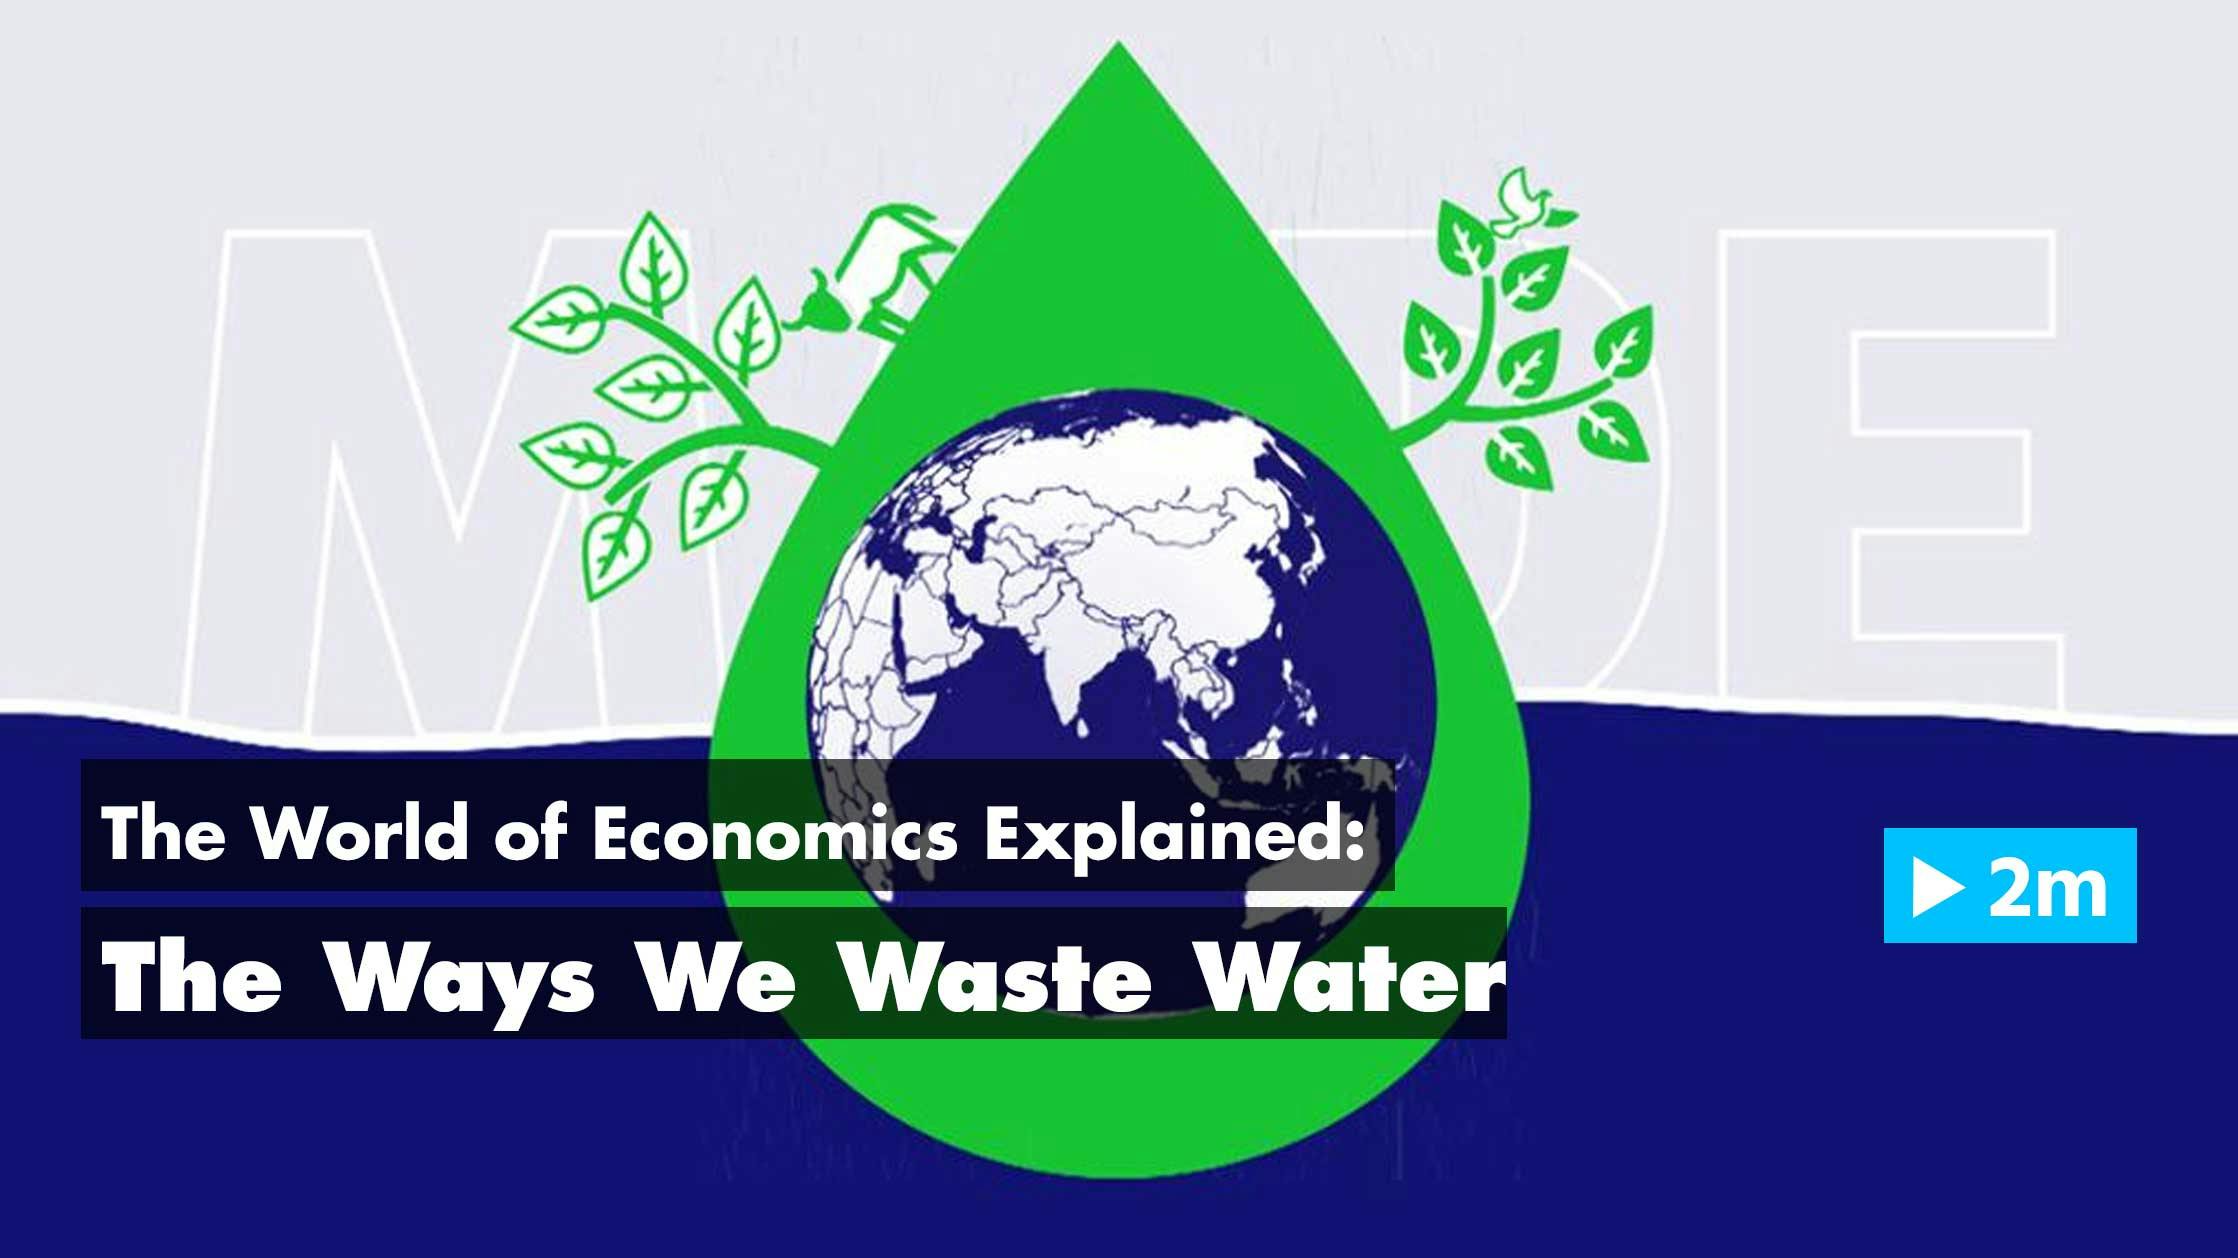 The World of Economics Explained: The Ways We Waste Water